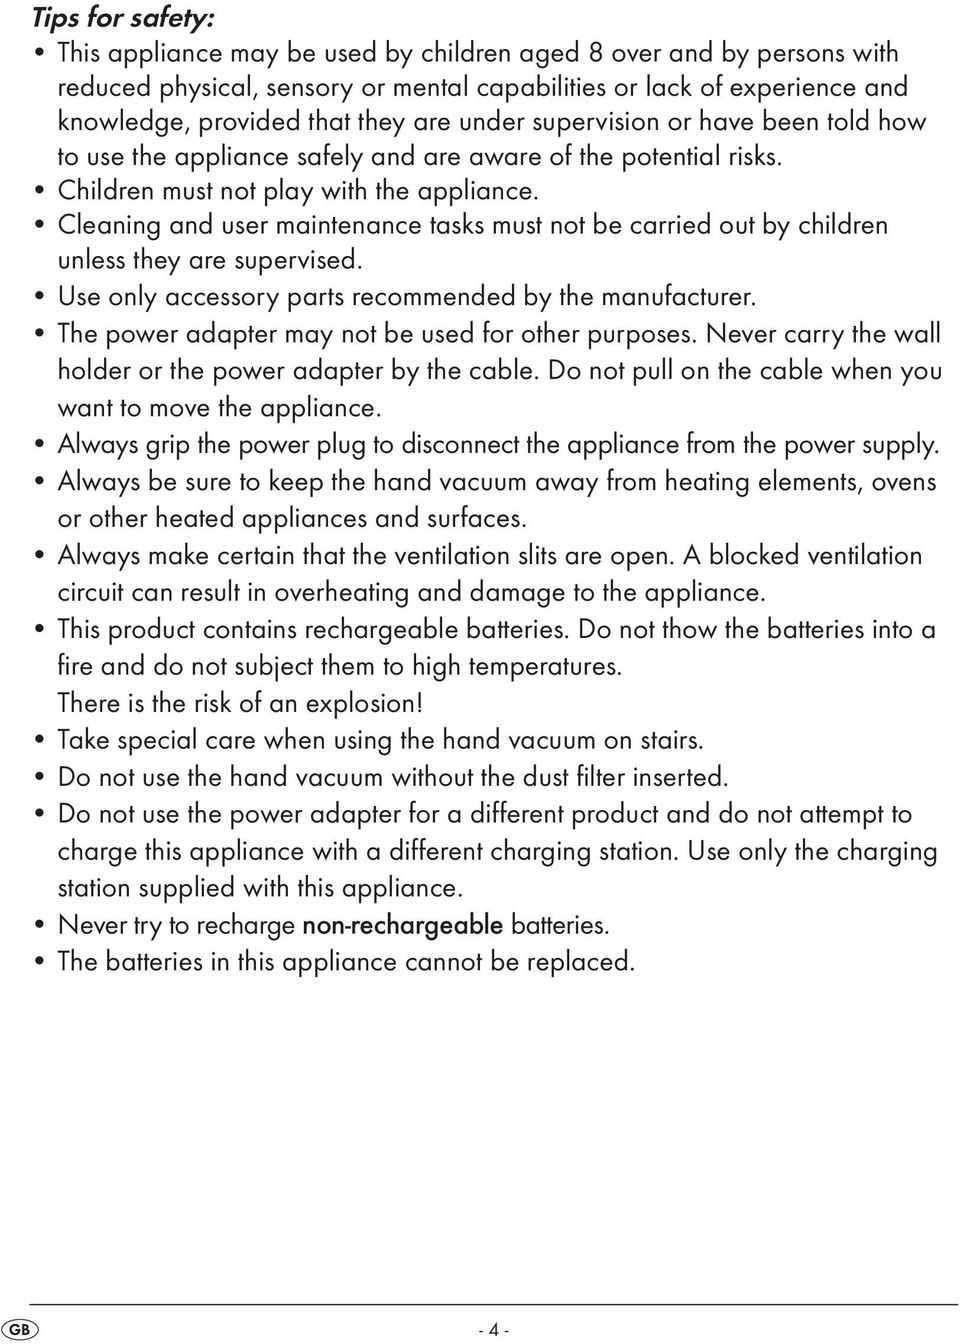 Cleaning and user maintenance tasks must not be carried out by children unless they are supervised. Use only accessory parts recommended by the manufacturer.